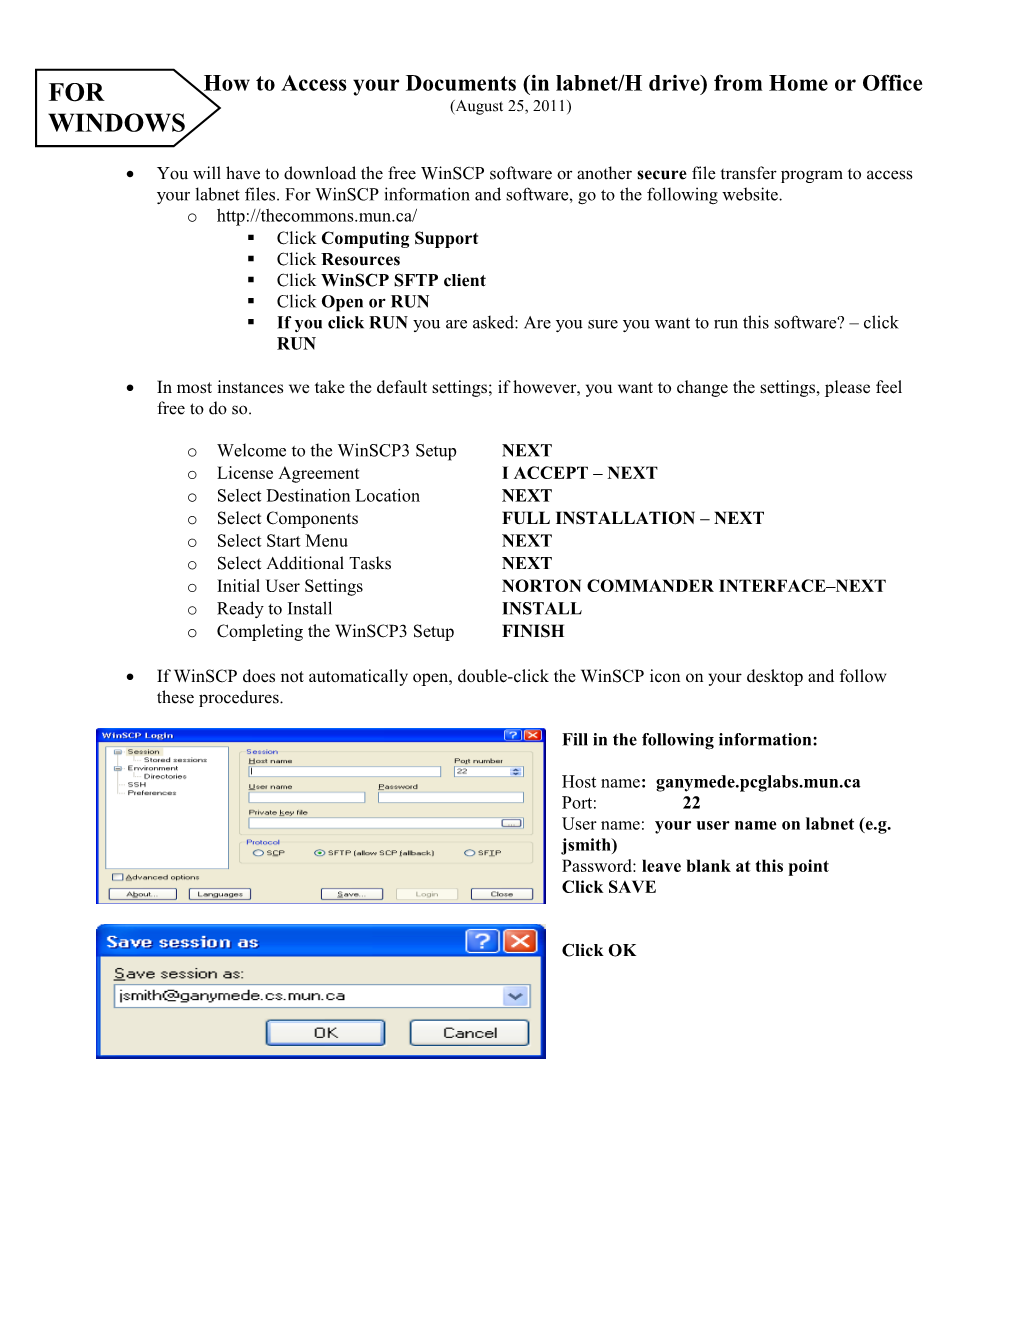 How to Access You Documents (From Labnet) from Home Or Office Etc